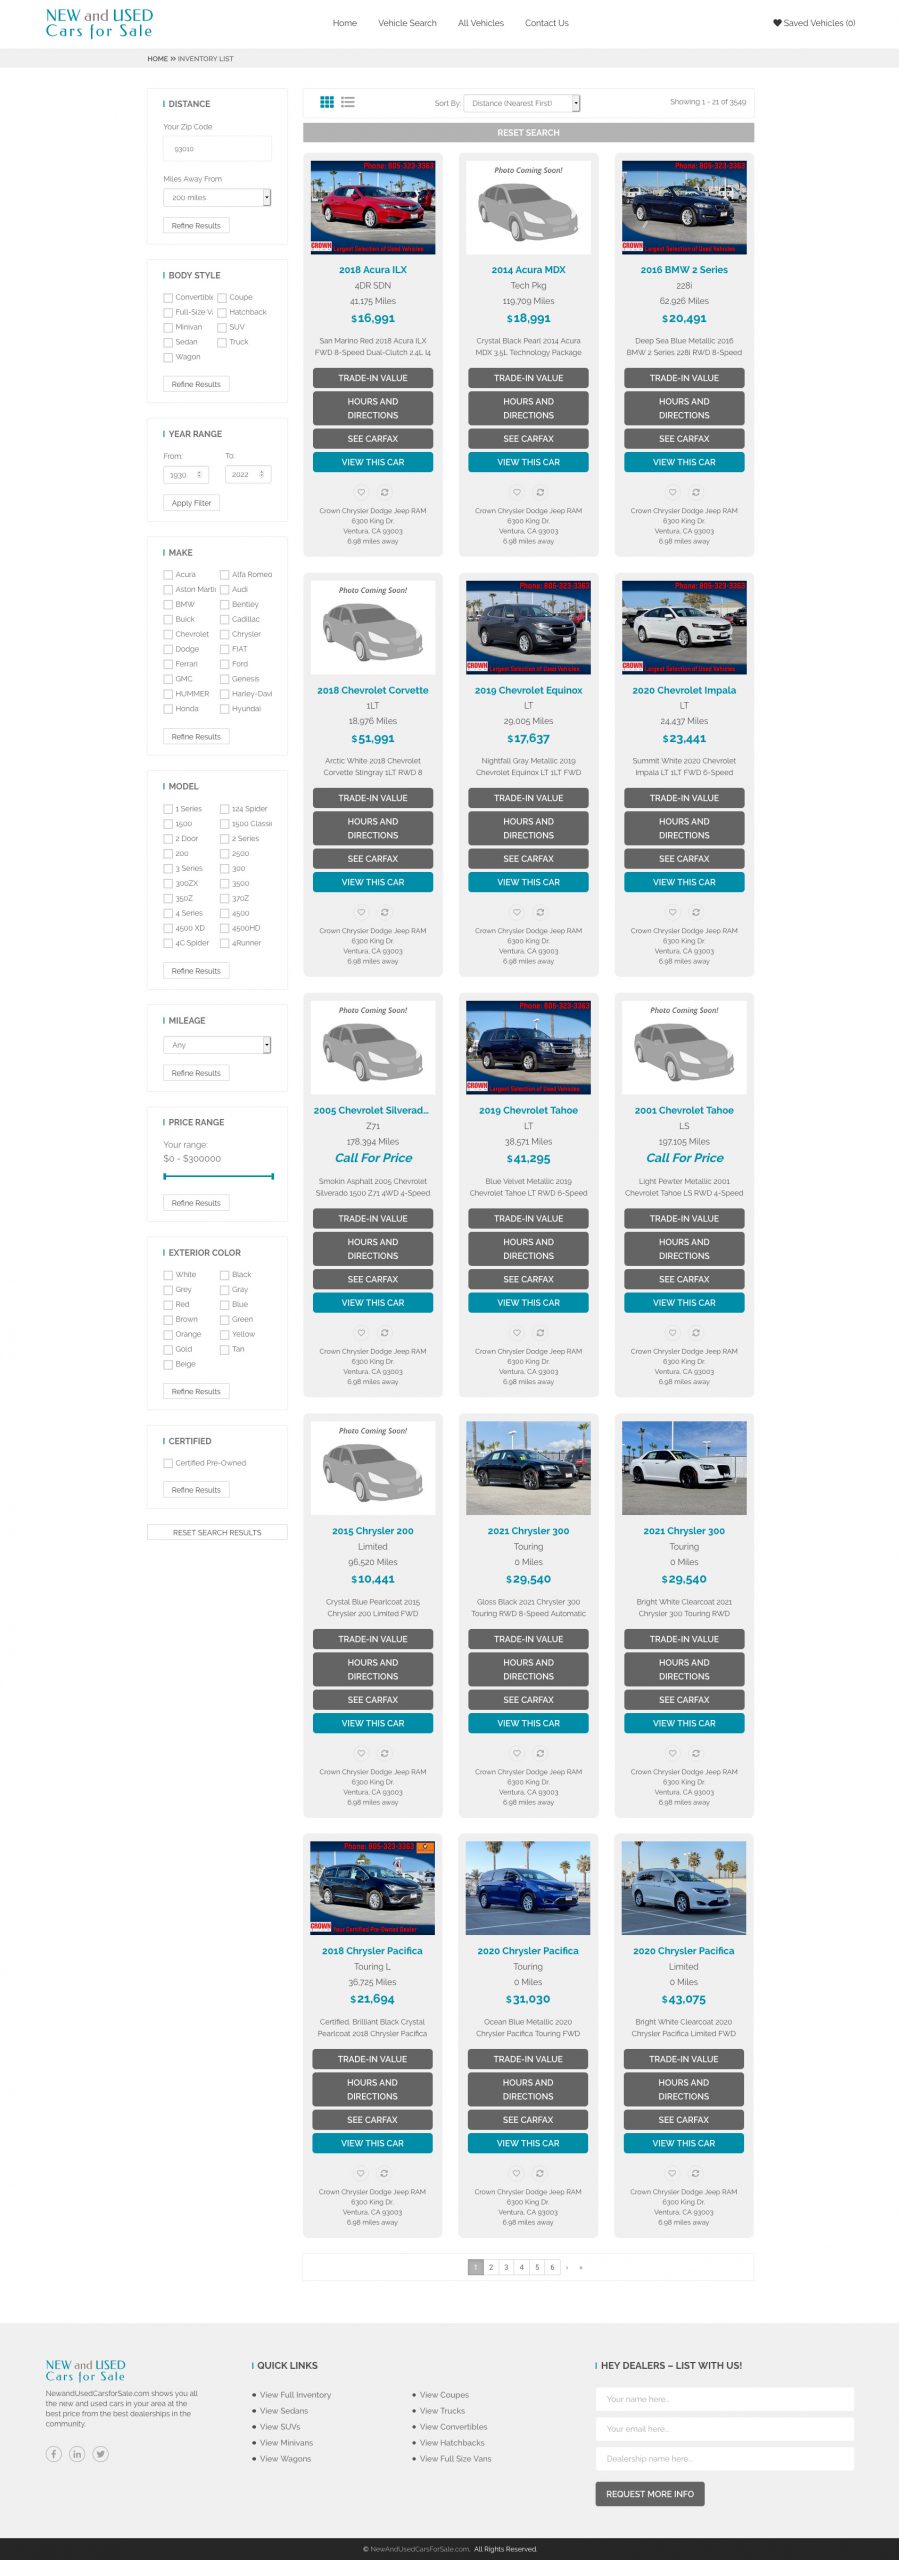 Inventory page for New and Used Cars for Sale